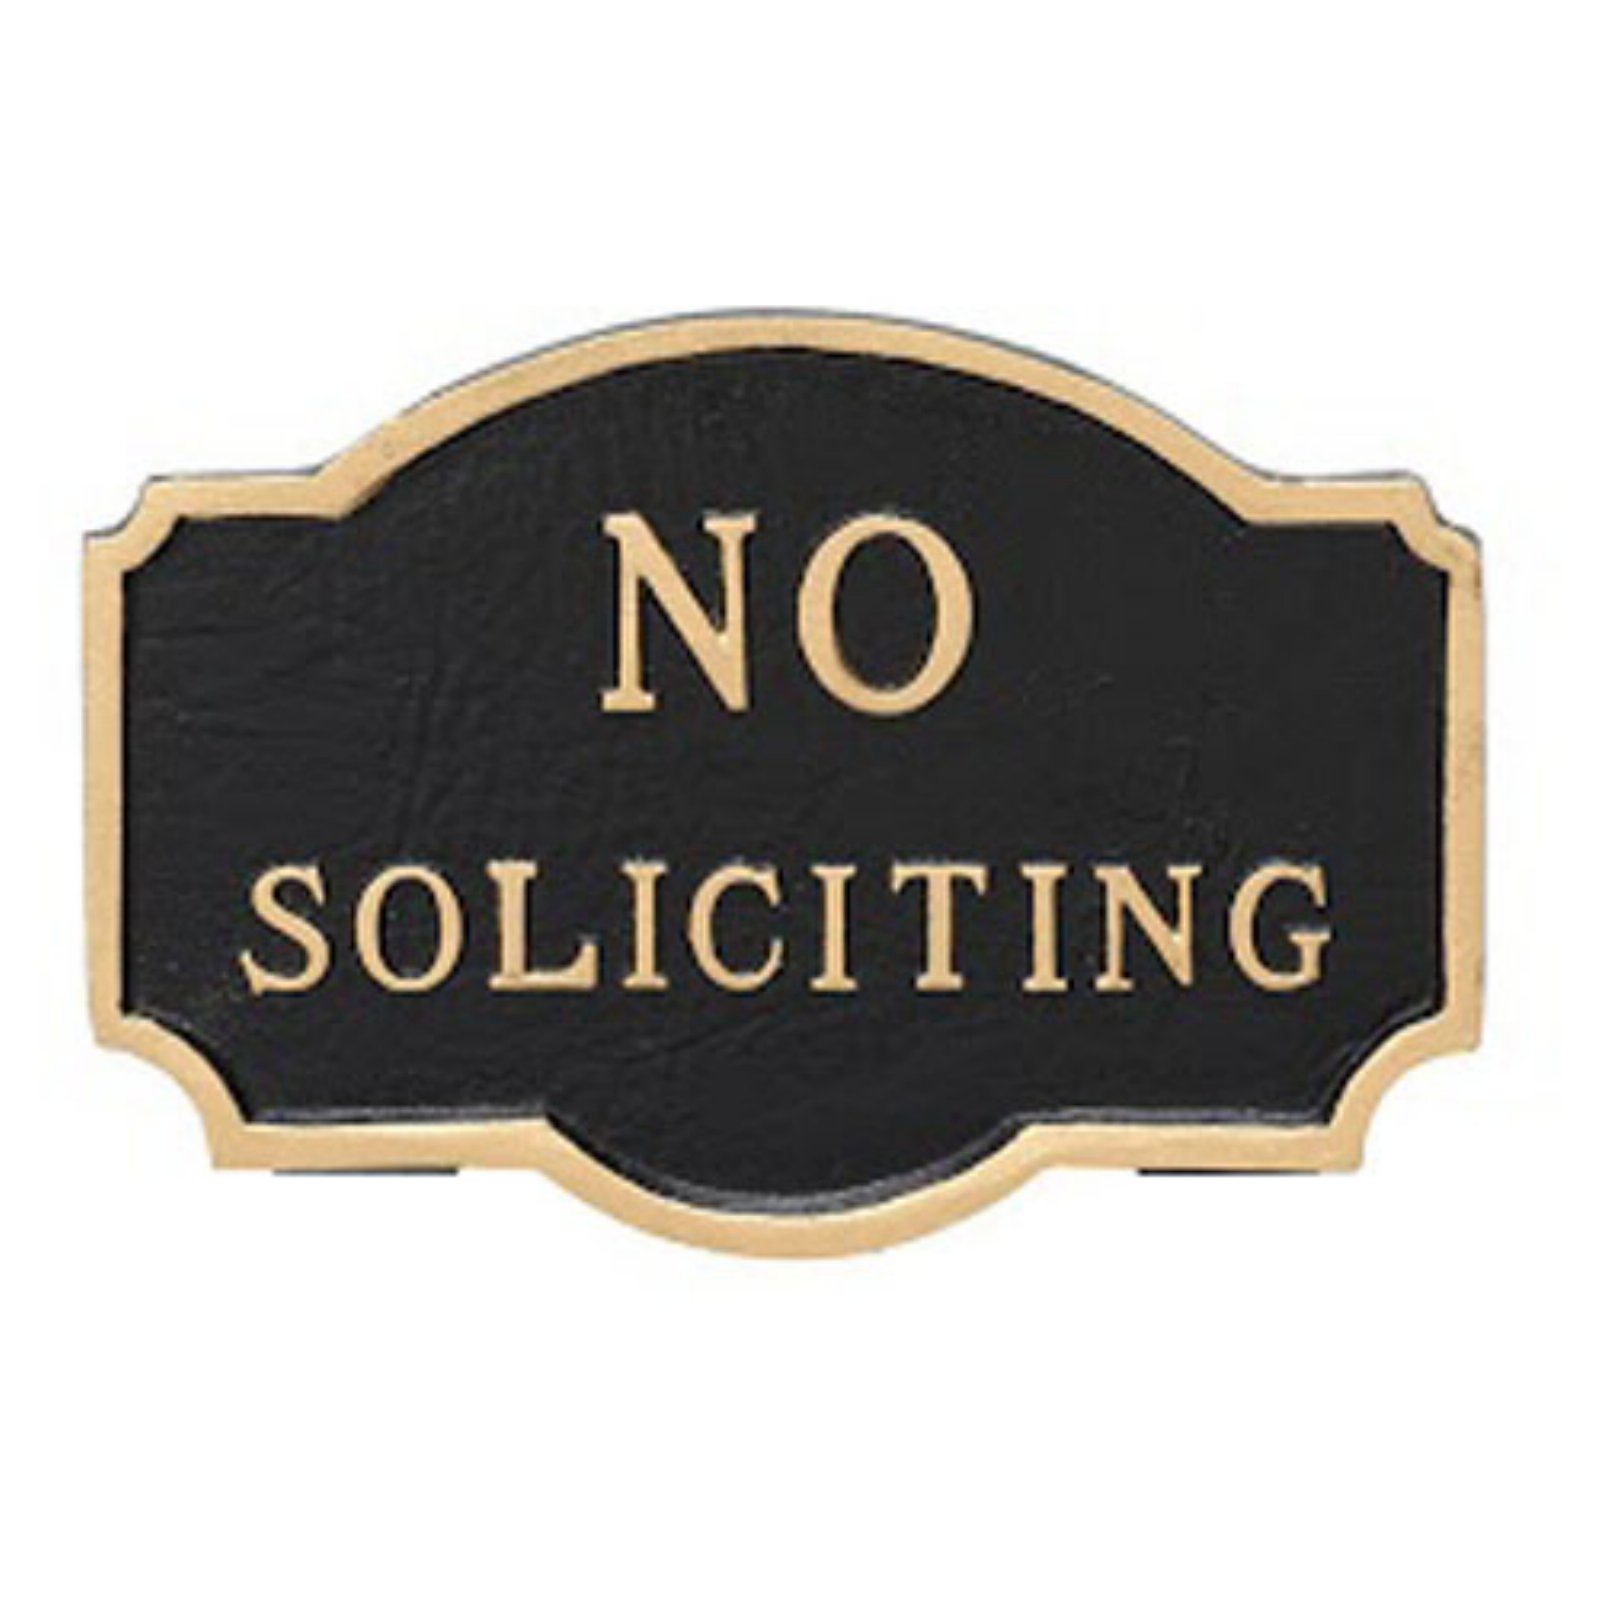 montague metal products petite montague no soliciting statement plaque, black with gold letter, 4.5" x 7.15" - image 2 of 2